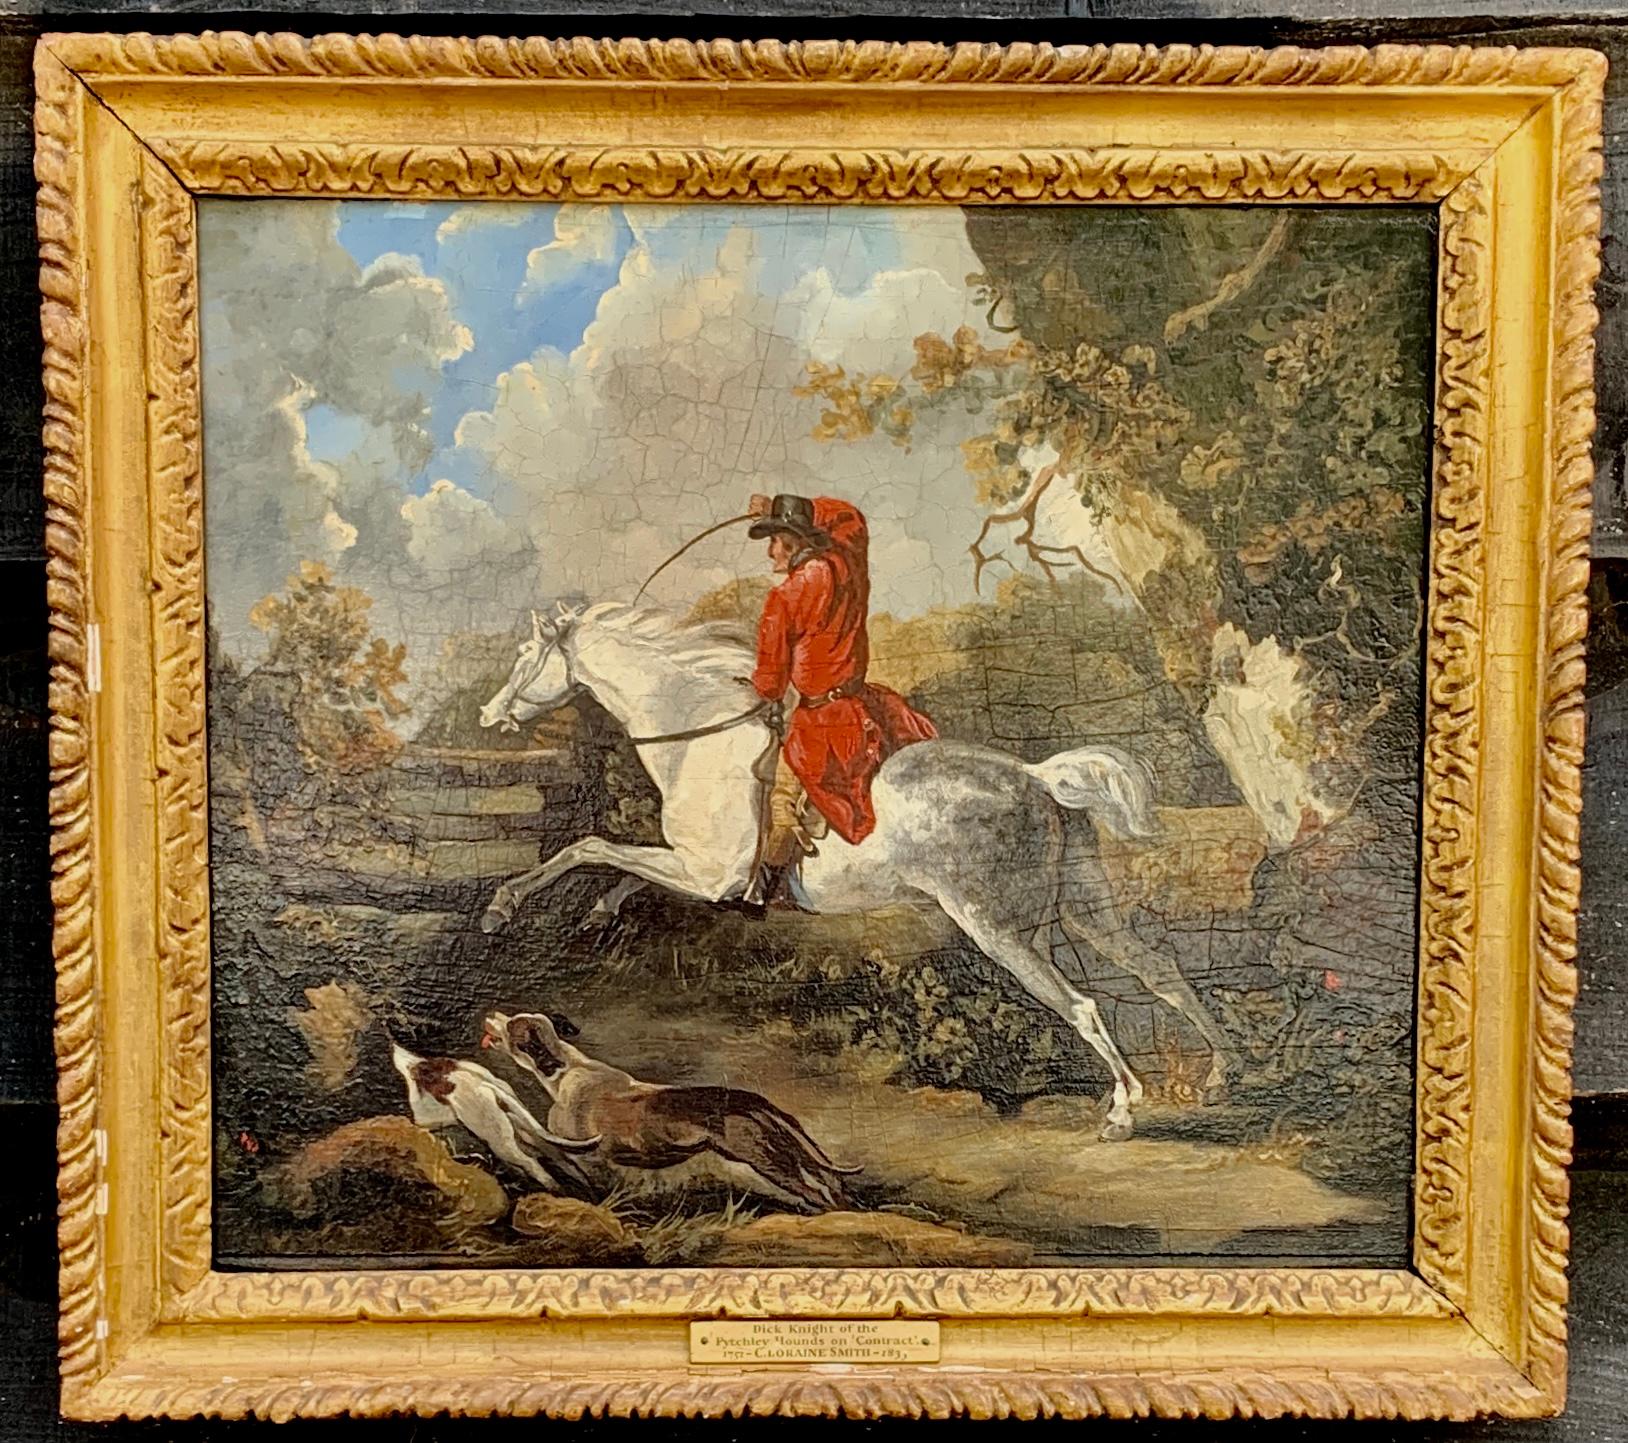 Charles Loraine Smith Animal Painting - English 18th century Fox hunting landscape, with Dick Knight and Pytchley Hounds